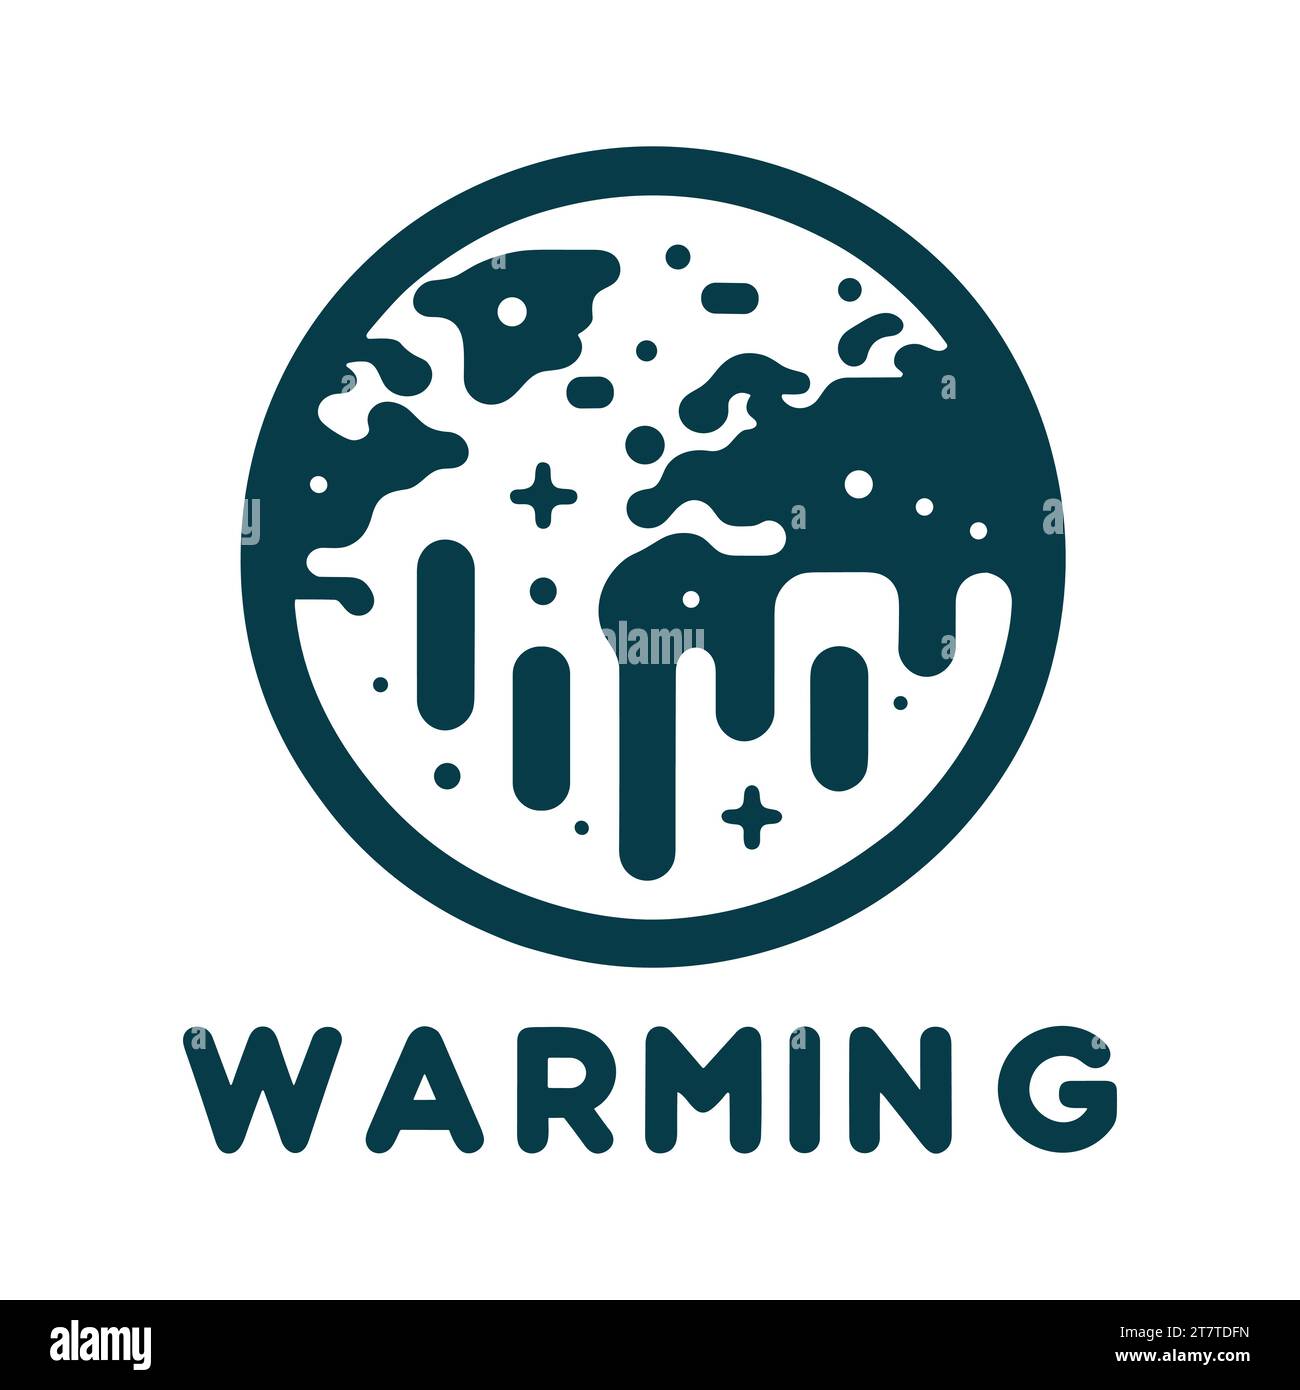 Earth climate crisis emblem. Global warming concept icon with melting earth. Vector illustration Stock Vector